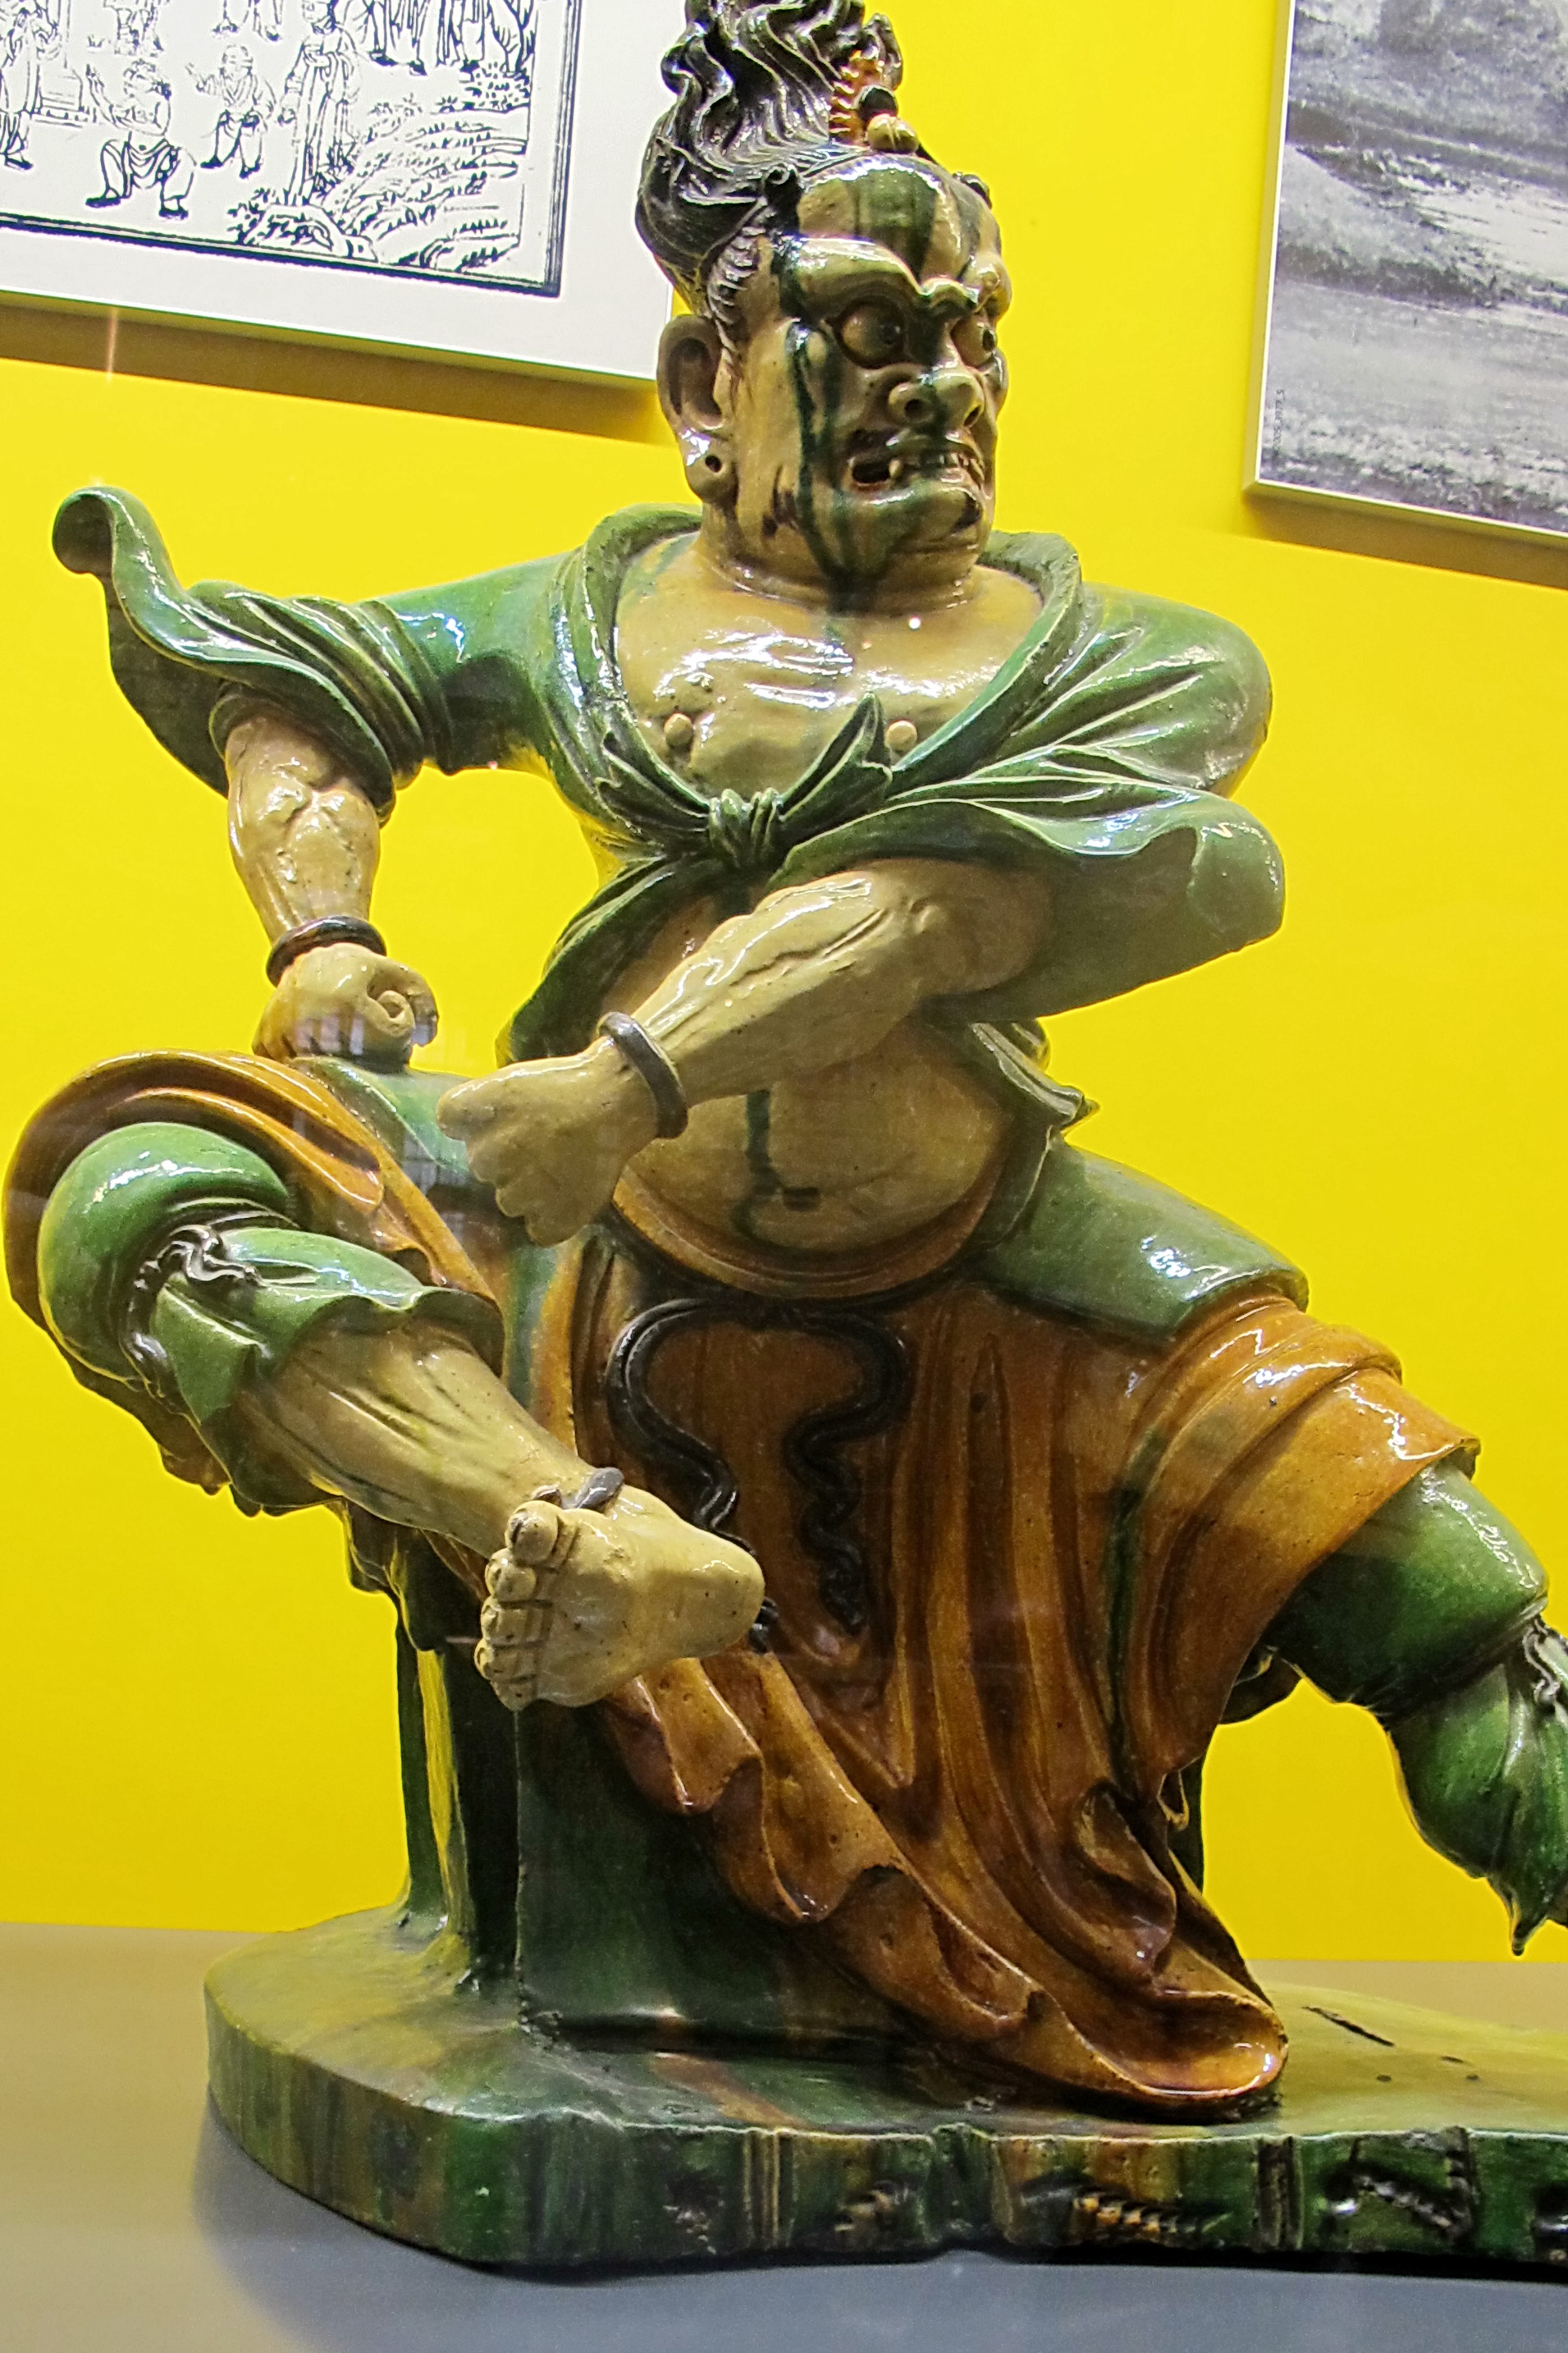 A statue of Yanluo Wong, the deity in charge of the Chinese afterworld, aka 'diyu'. Image from Flickr user Al_HikesAZ